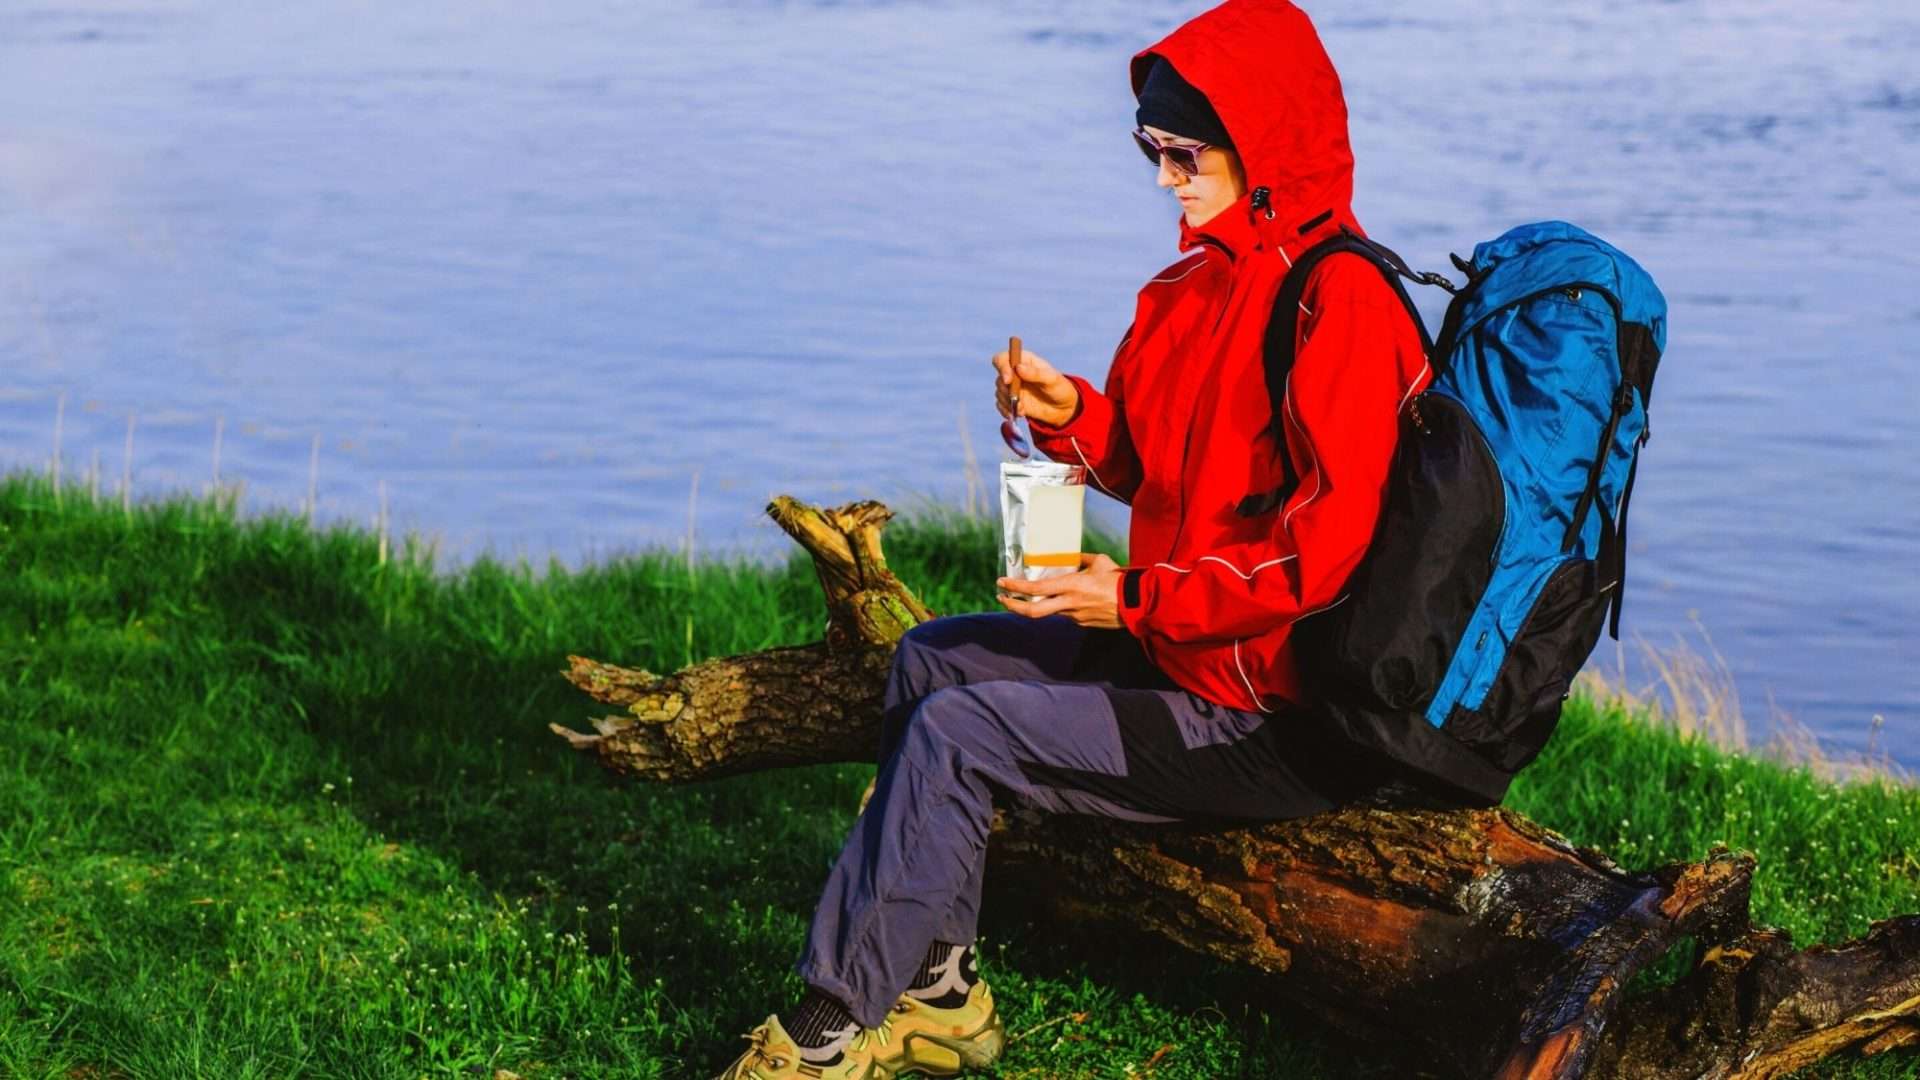 Hiker eating food from a pouch